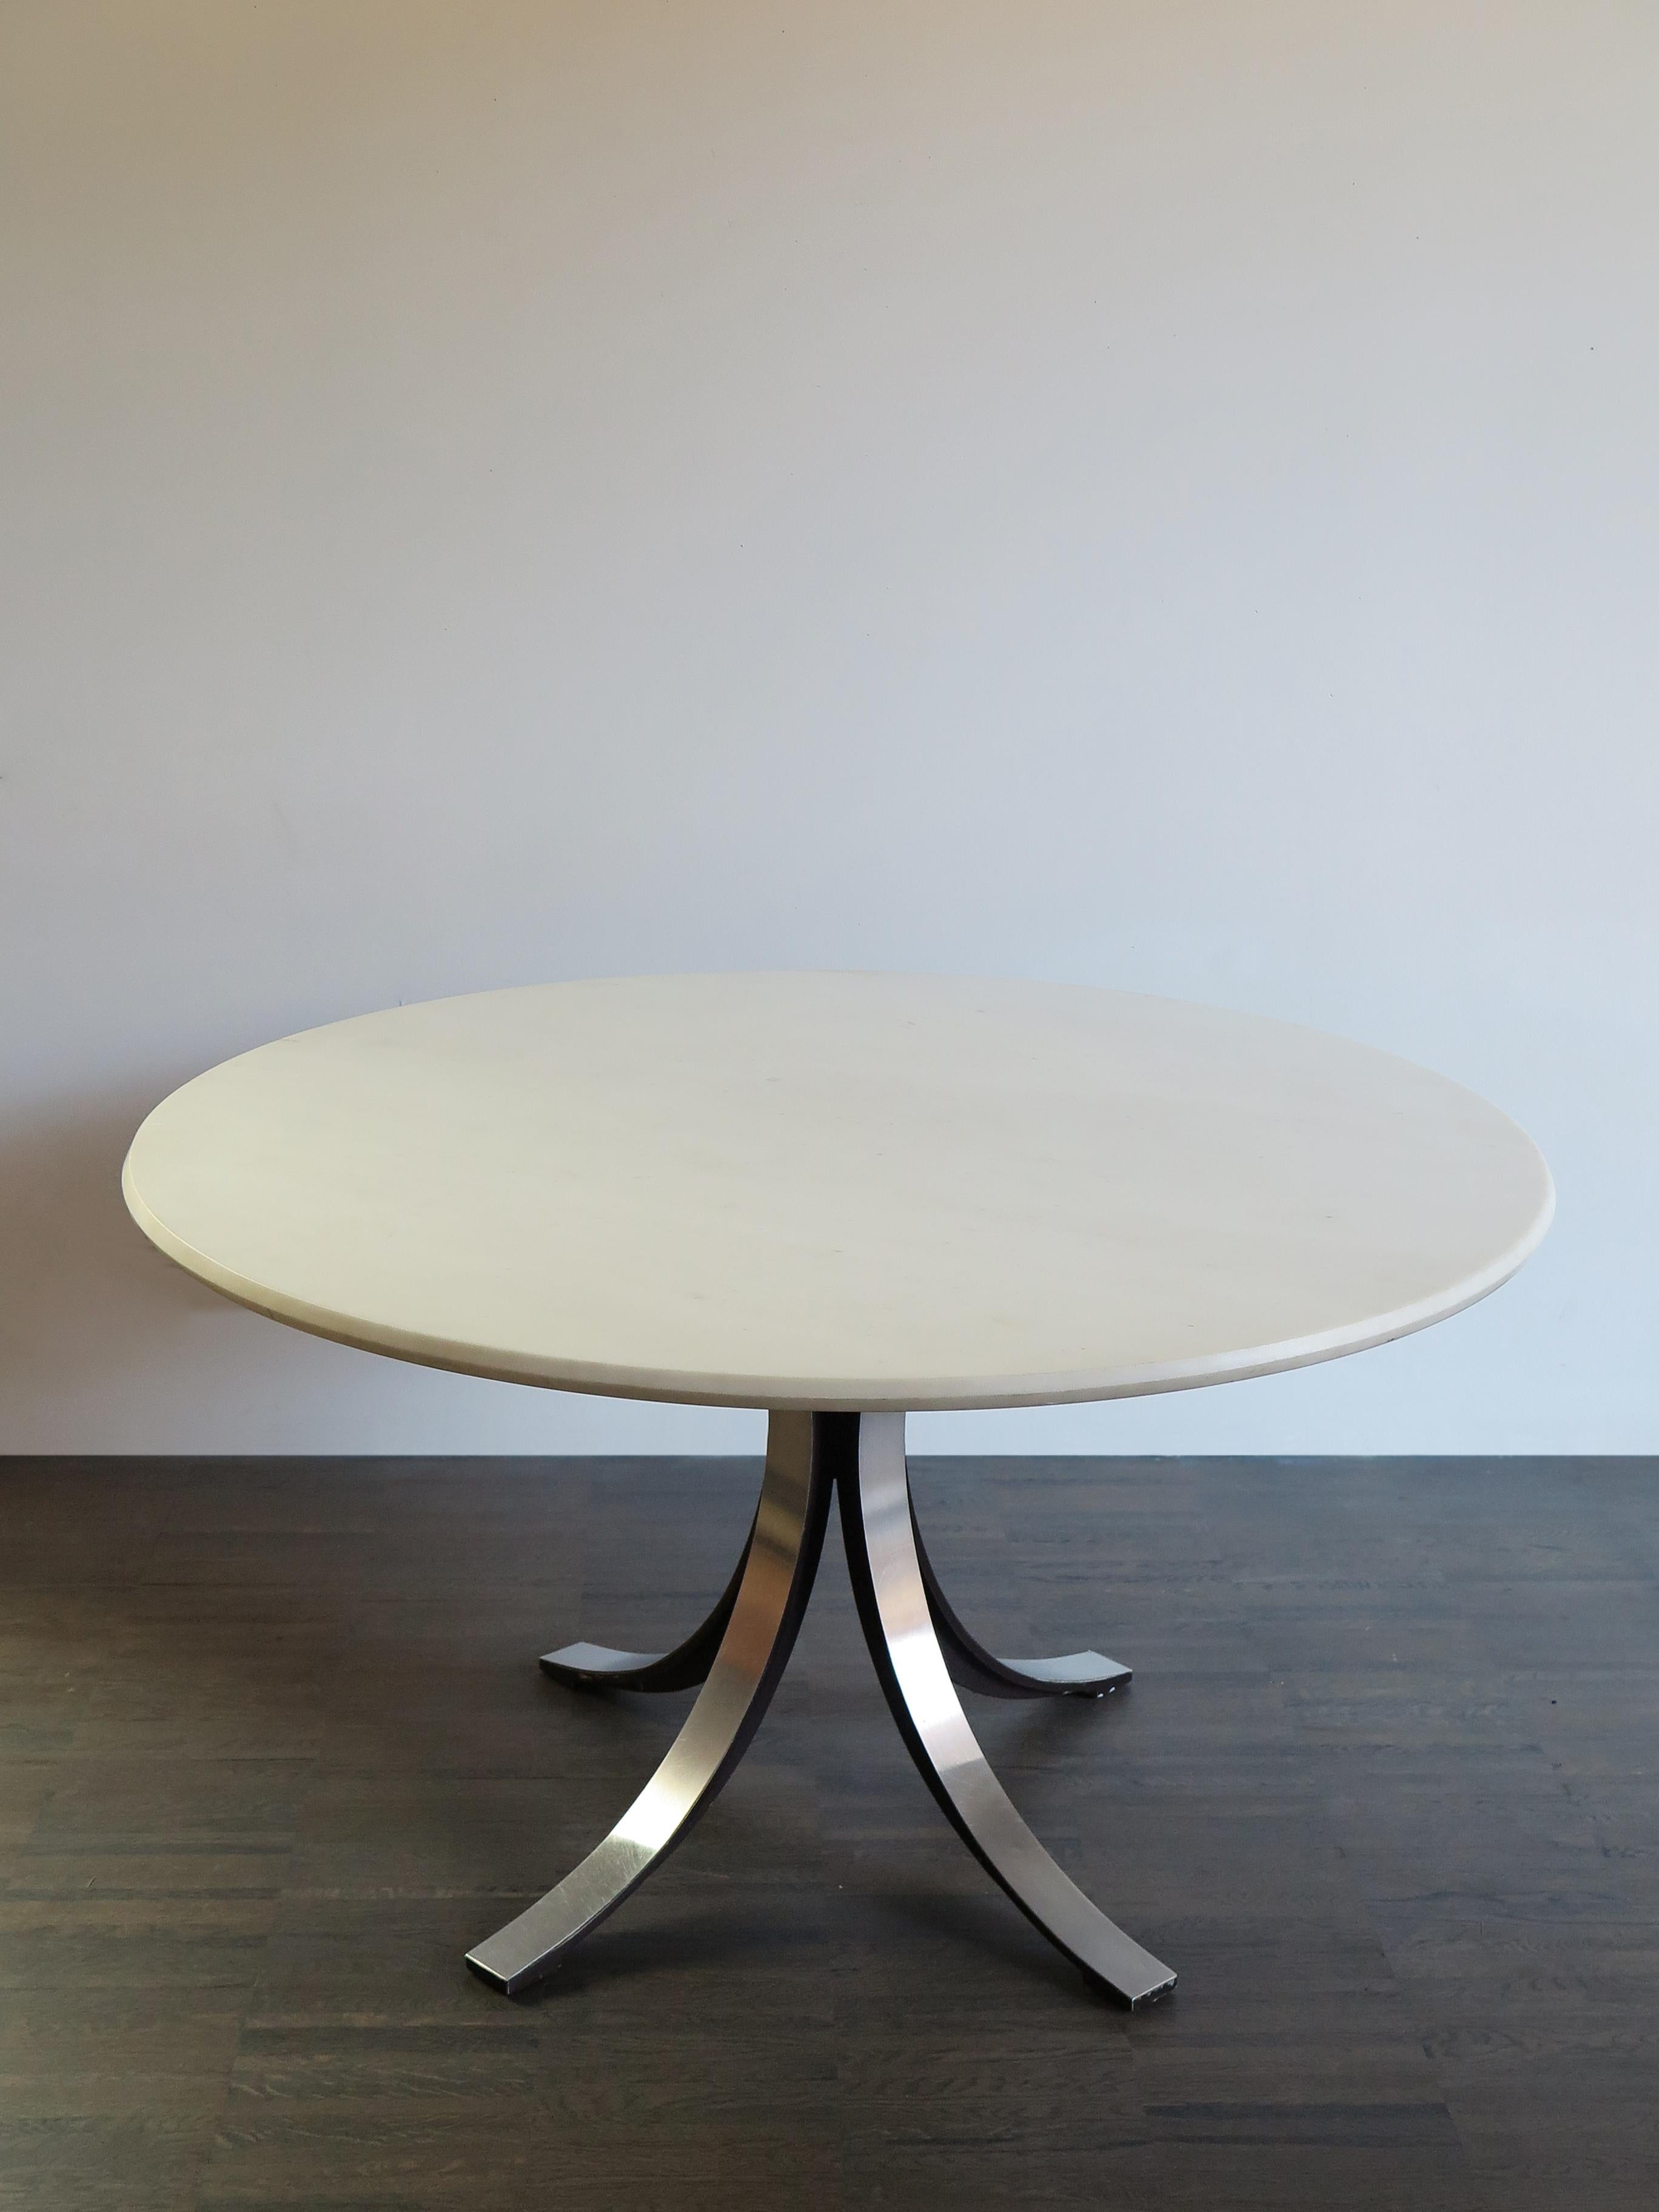 Italian rare and famous circle Mid-Century Modern design dining table model T69 designed by Osvaldo Borsani and Eugenio Gerli for Tecno in 1963 with White Carrara marble-top and with the four famous metal saber feet. Manufacturing